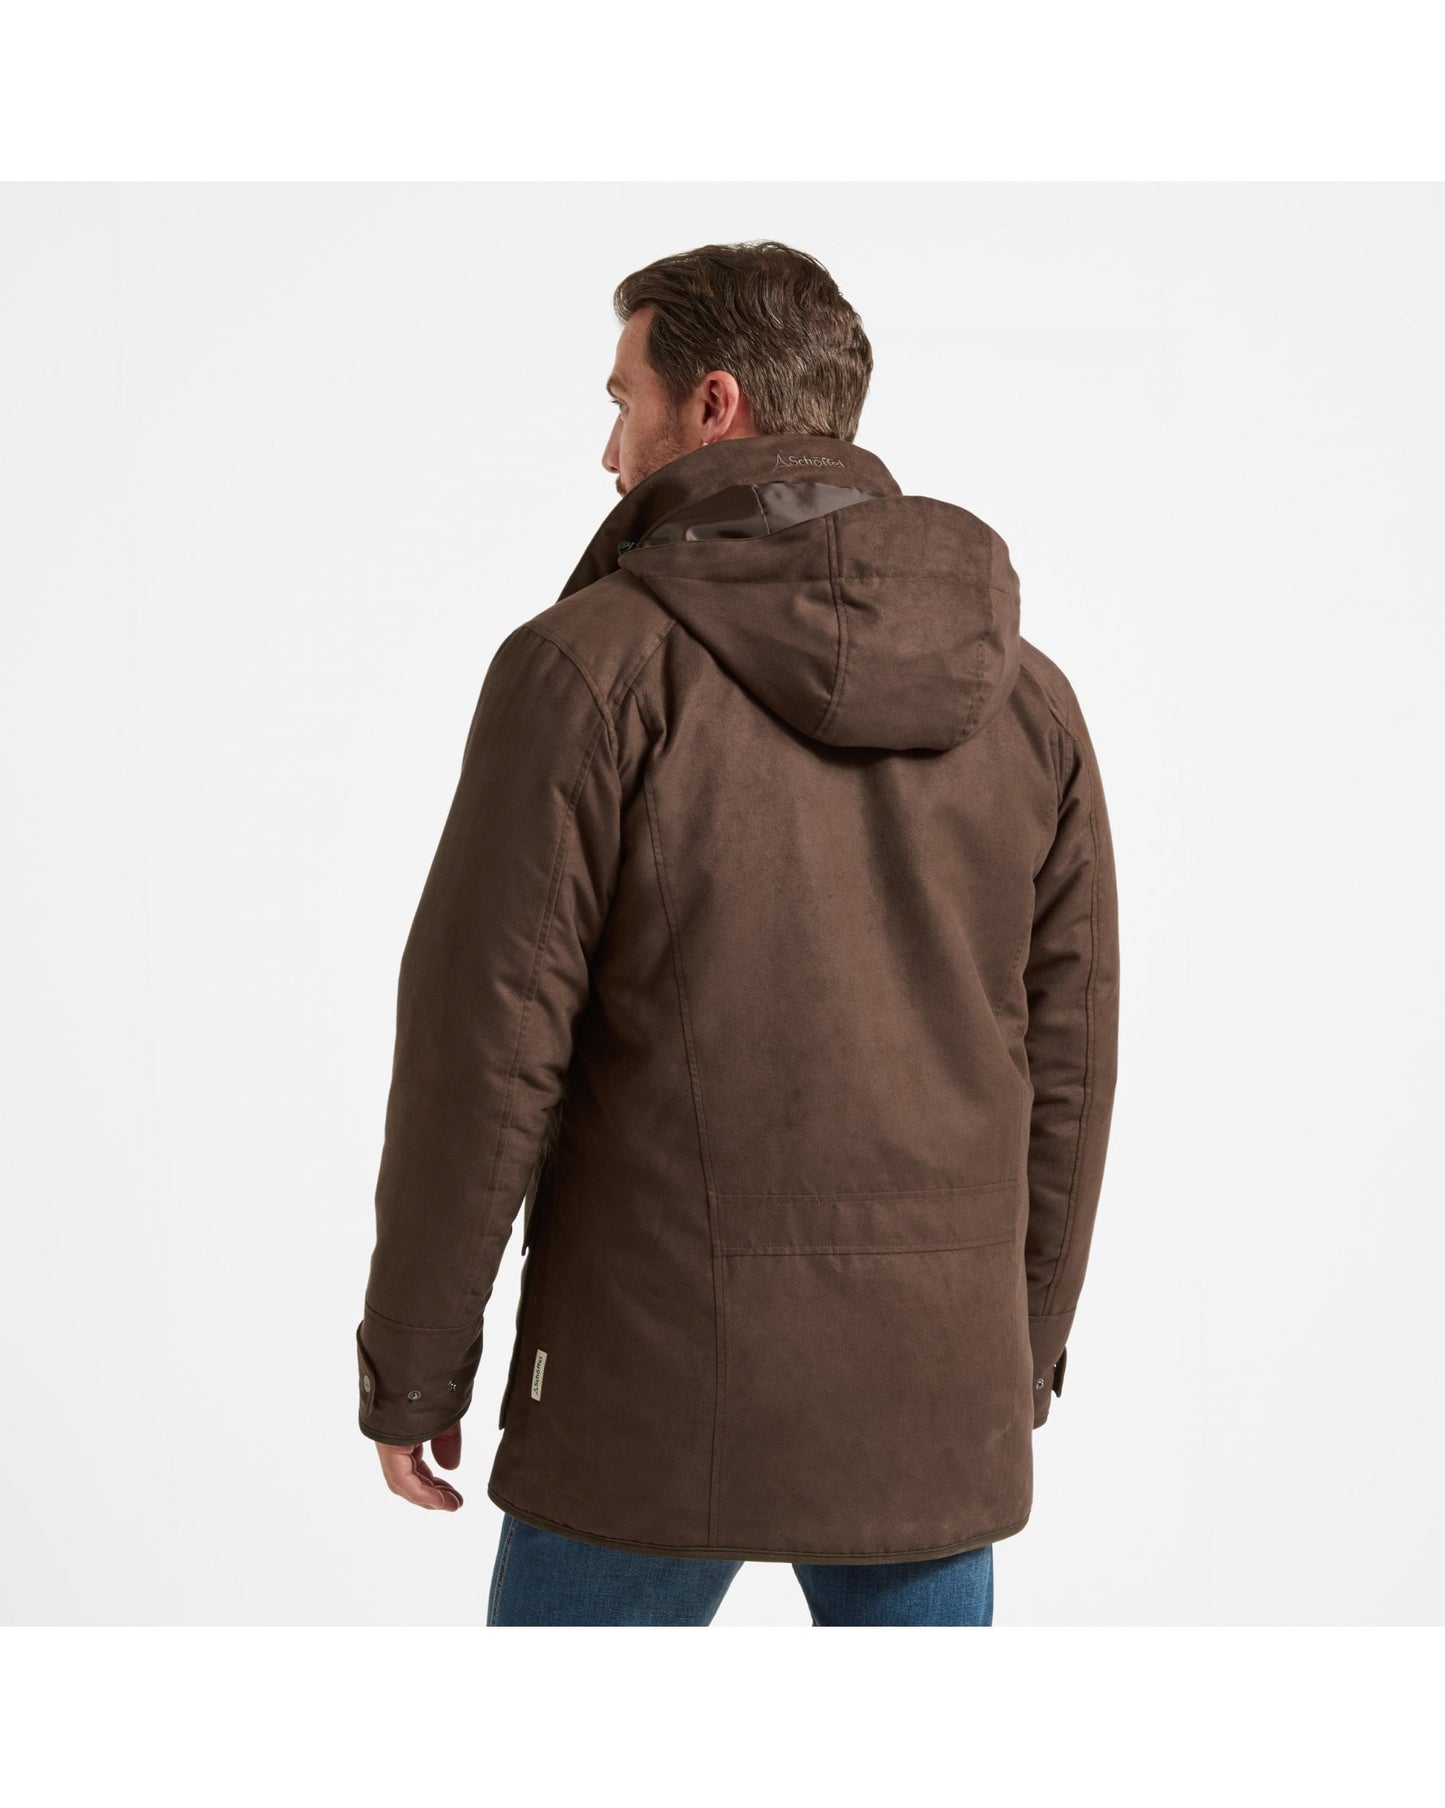 Oundle Waterproof Country Coat